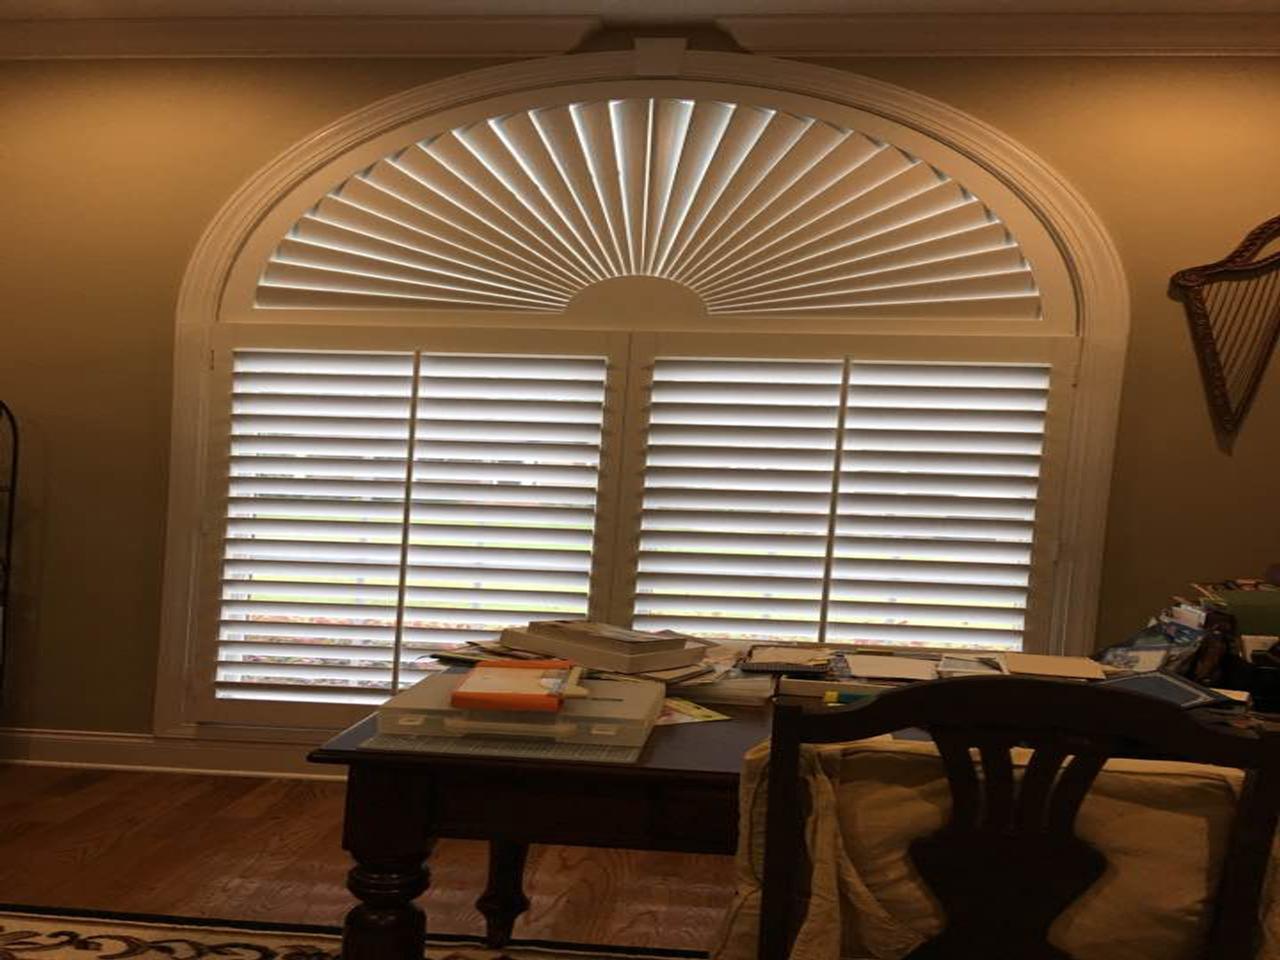 Home office with sunburst on the arch top of the window